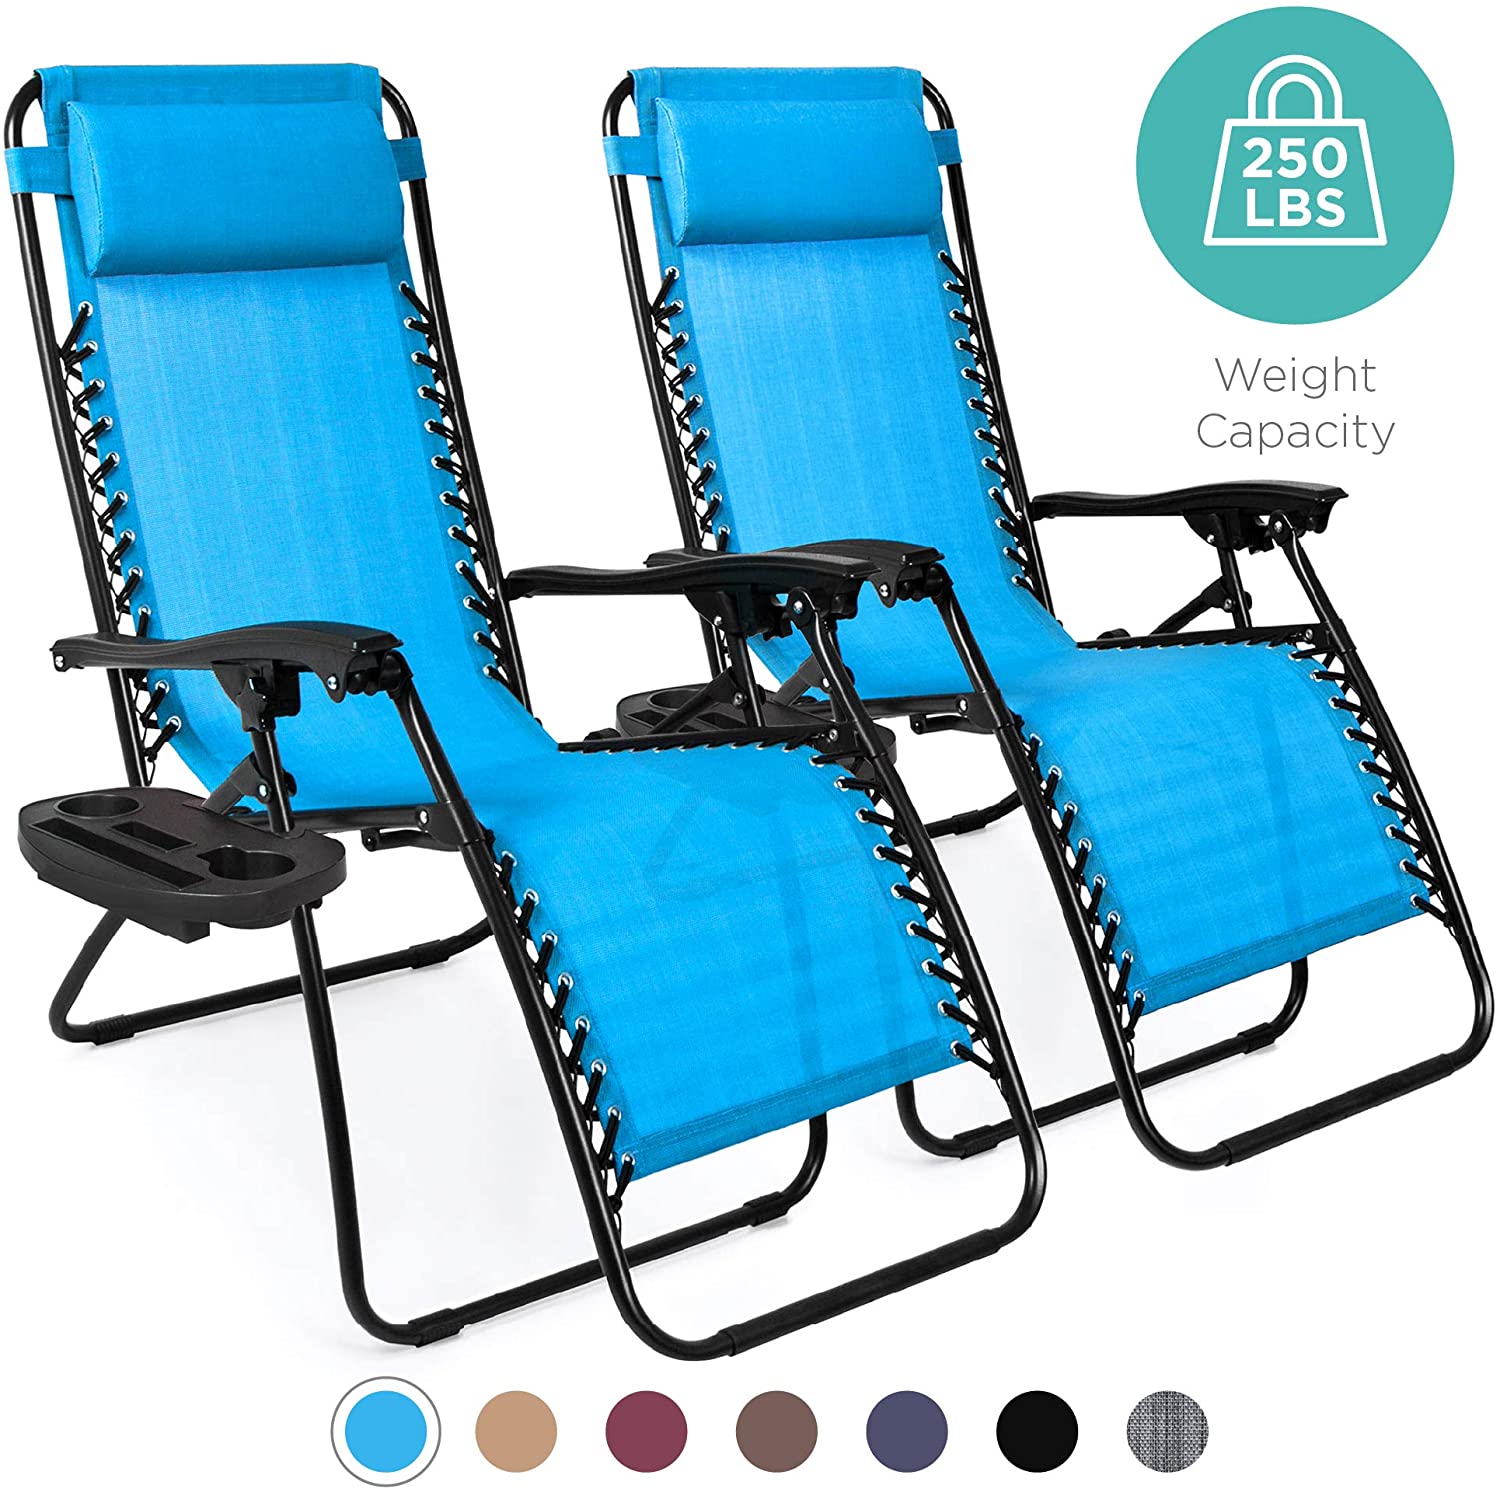 Best Zero Gravity Chair For Camping, What Are The Best Zero Gravity Chairs